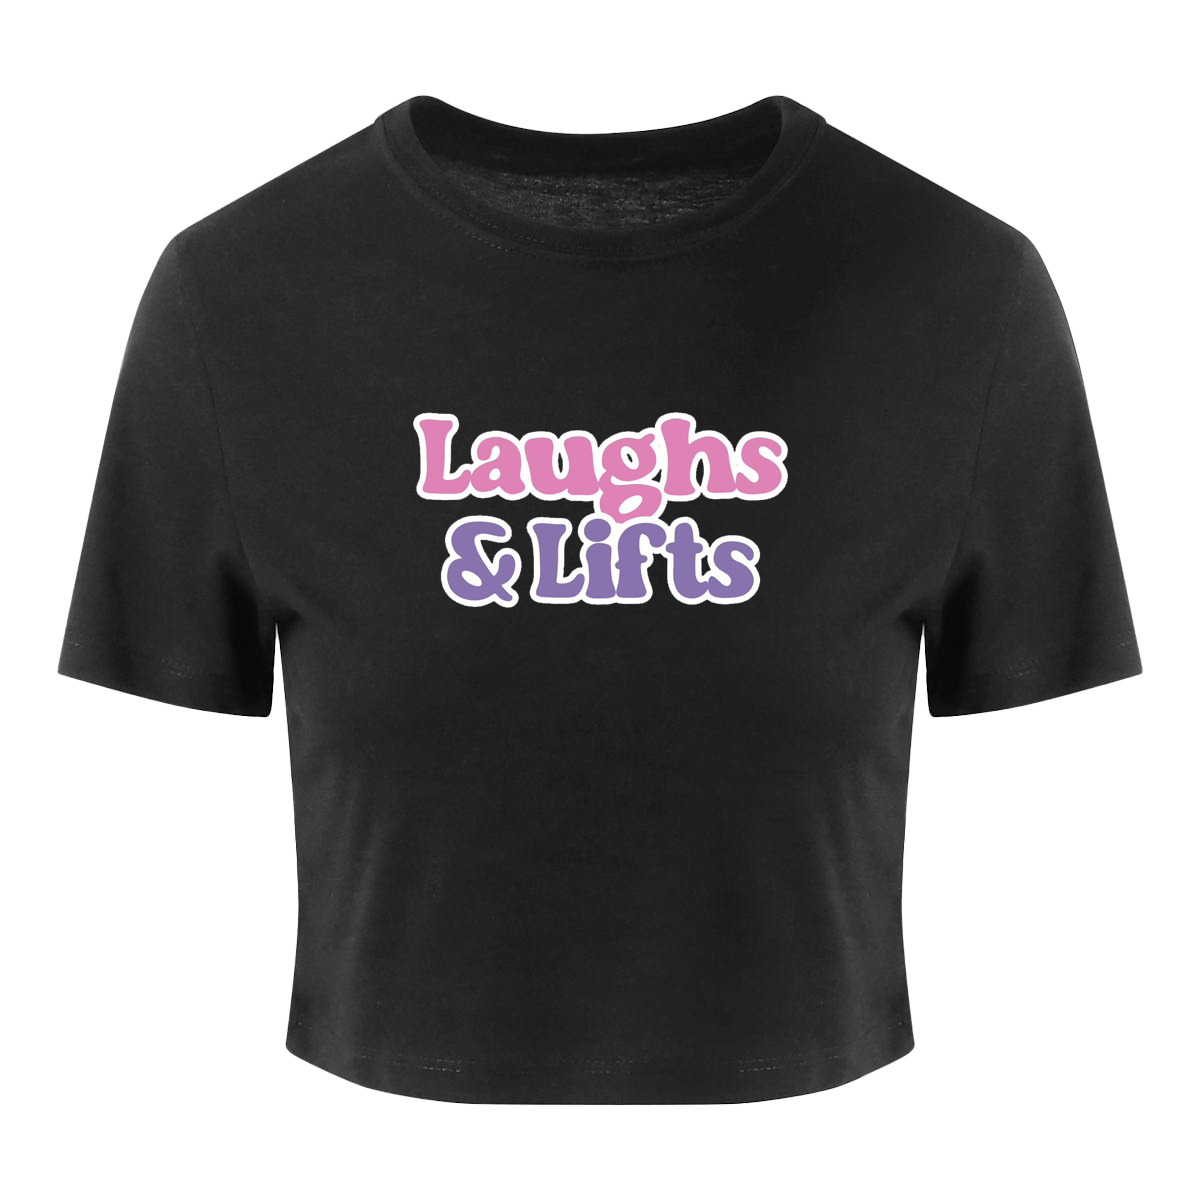 Laughs and Lifts Cropped Black Women's T-Shirt